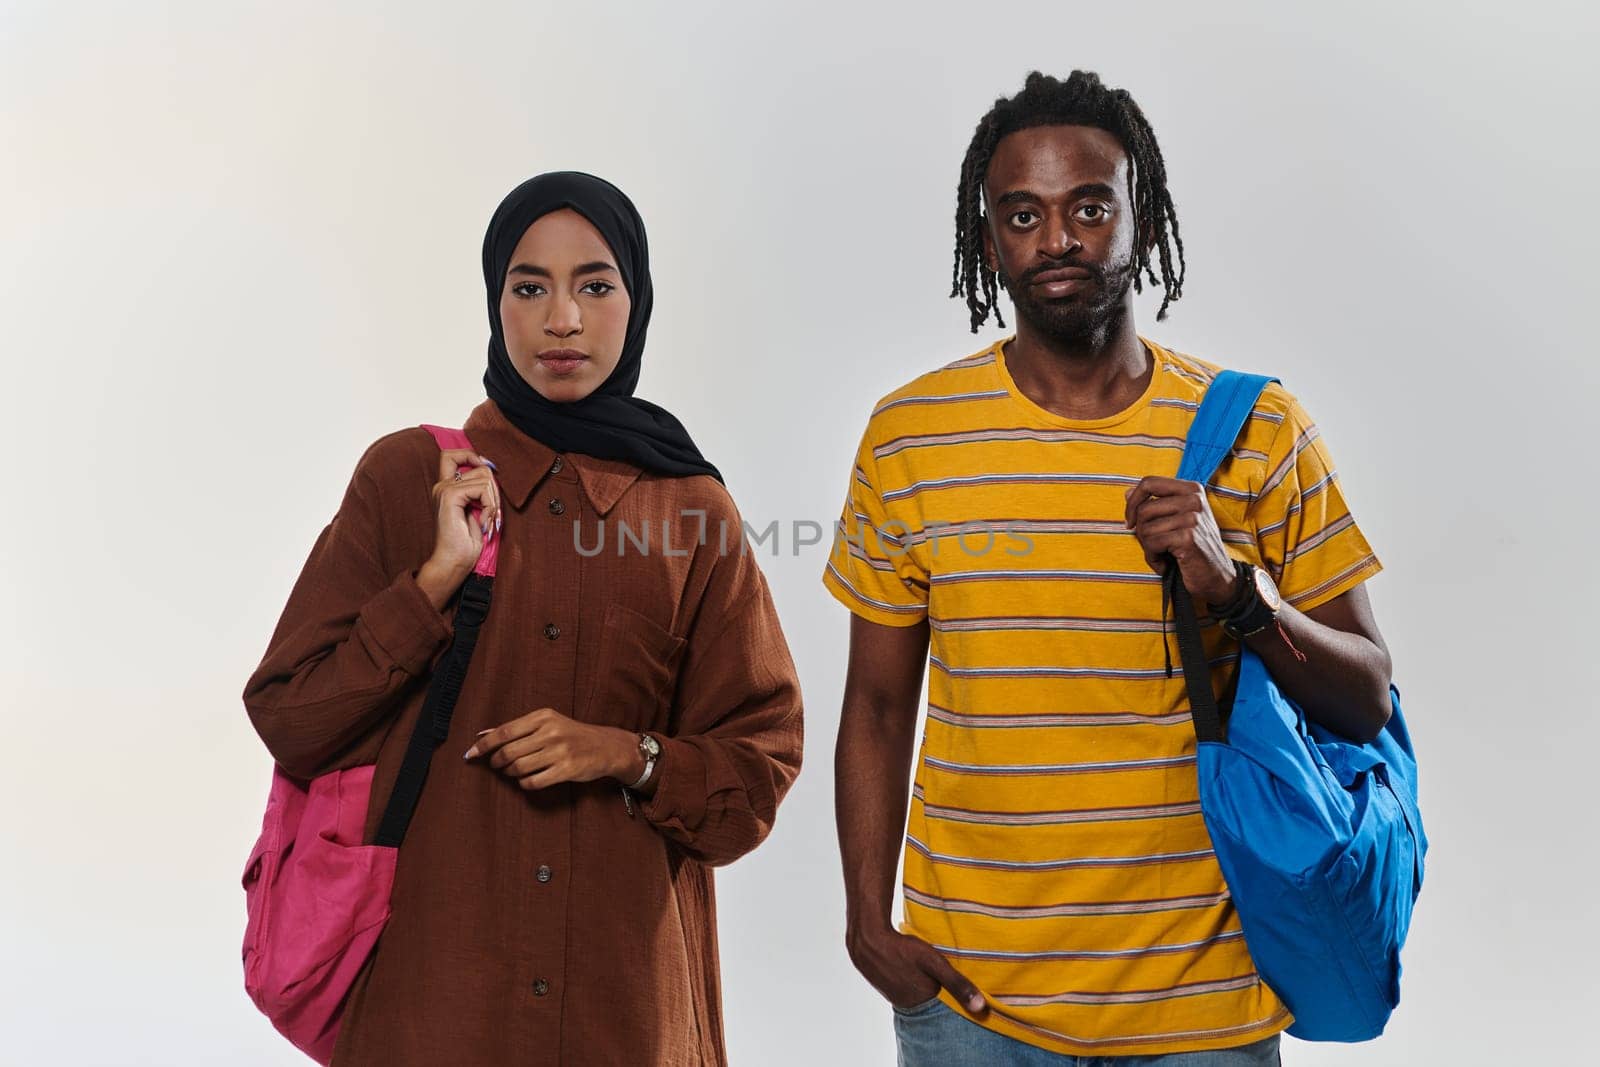 Against a clean white background, two students, an African American young man and a hijab-wearing woman, collaboratively use laptops in a display of technological empowerment and inclusive education, embodying the unity and diversity within the academic journey.